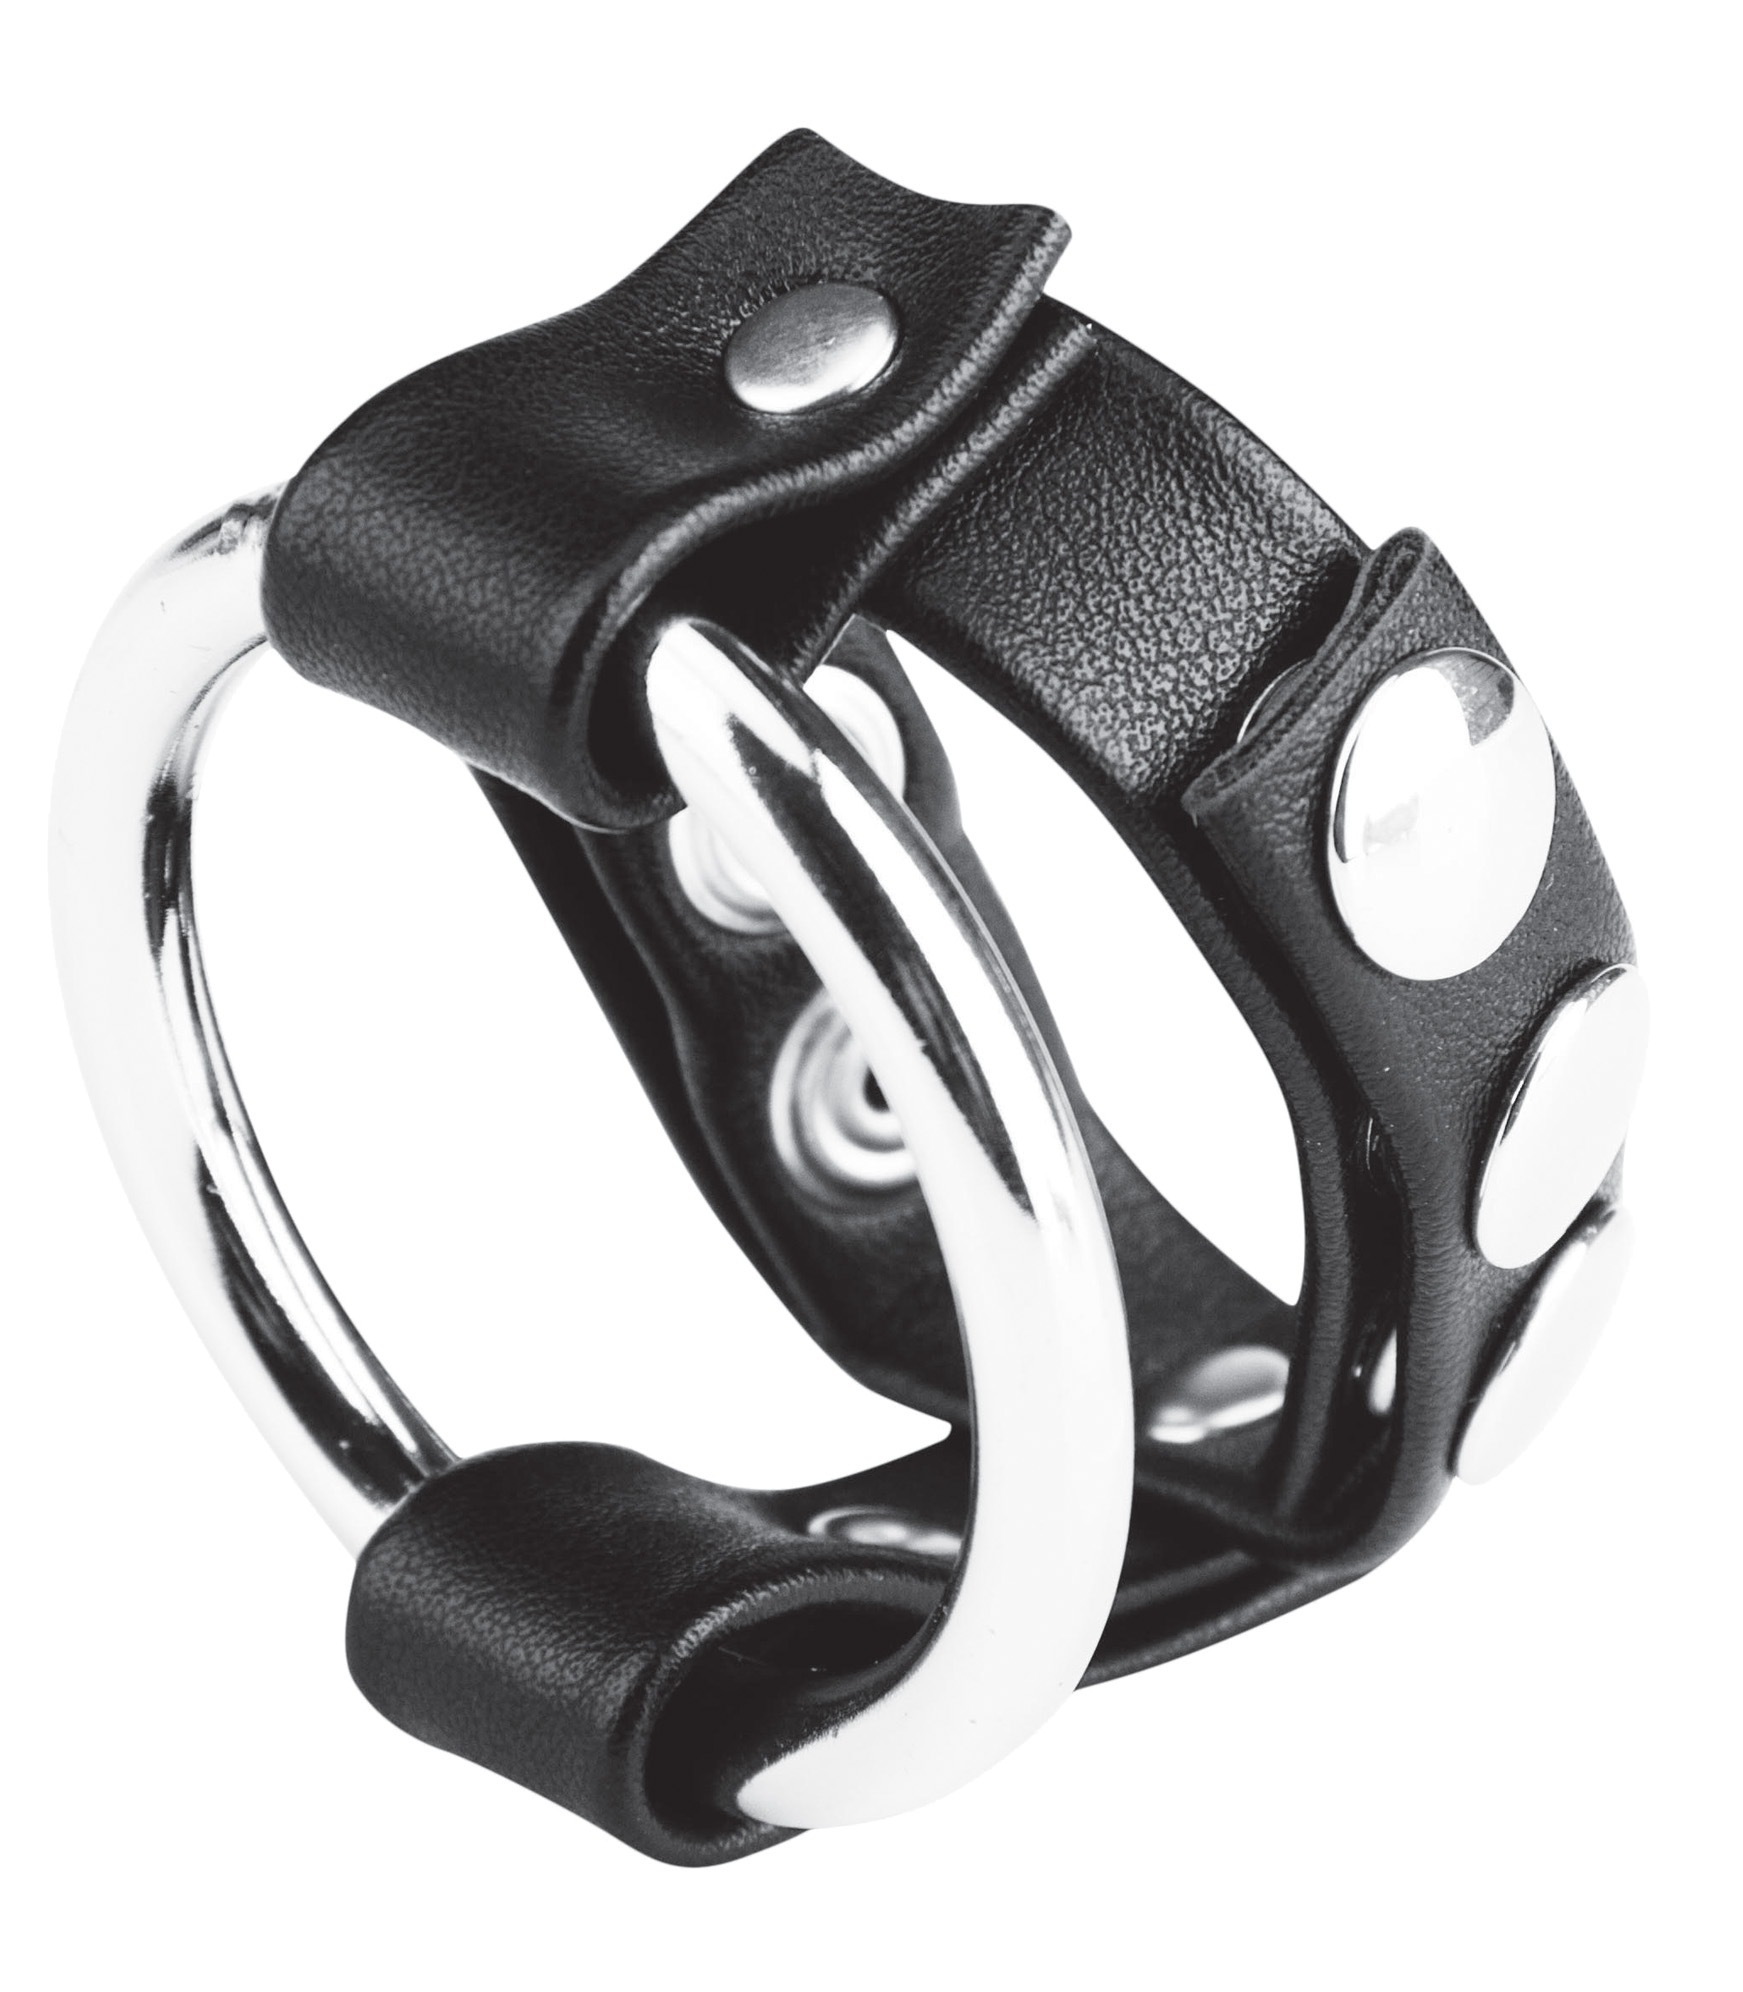 BLUE LINE C&B GEAR Metal Cock Ring With Adjust. Snap Ball Strap